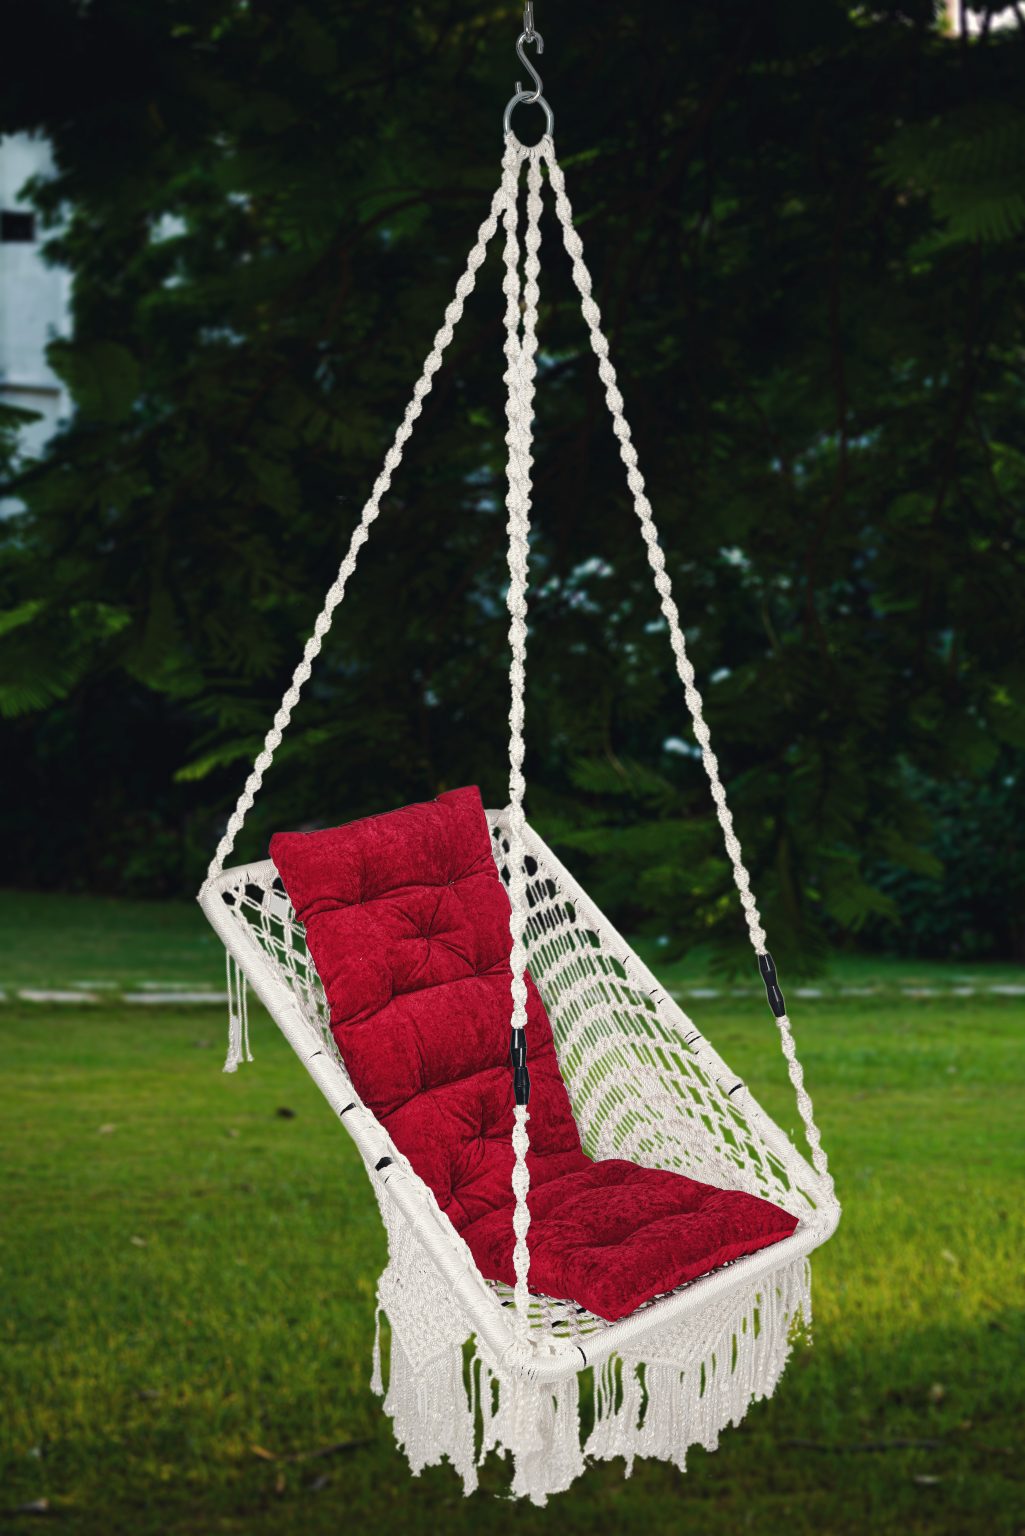 Patiofy Hanging Swing chair for Home | Best Swing for Adults